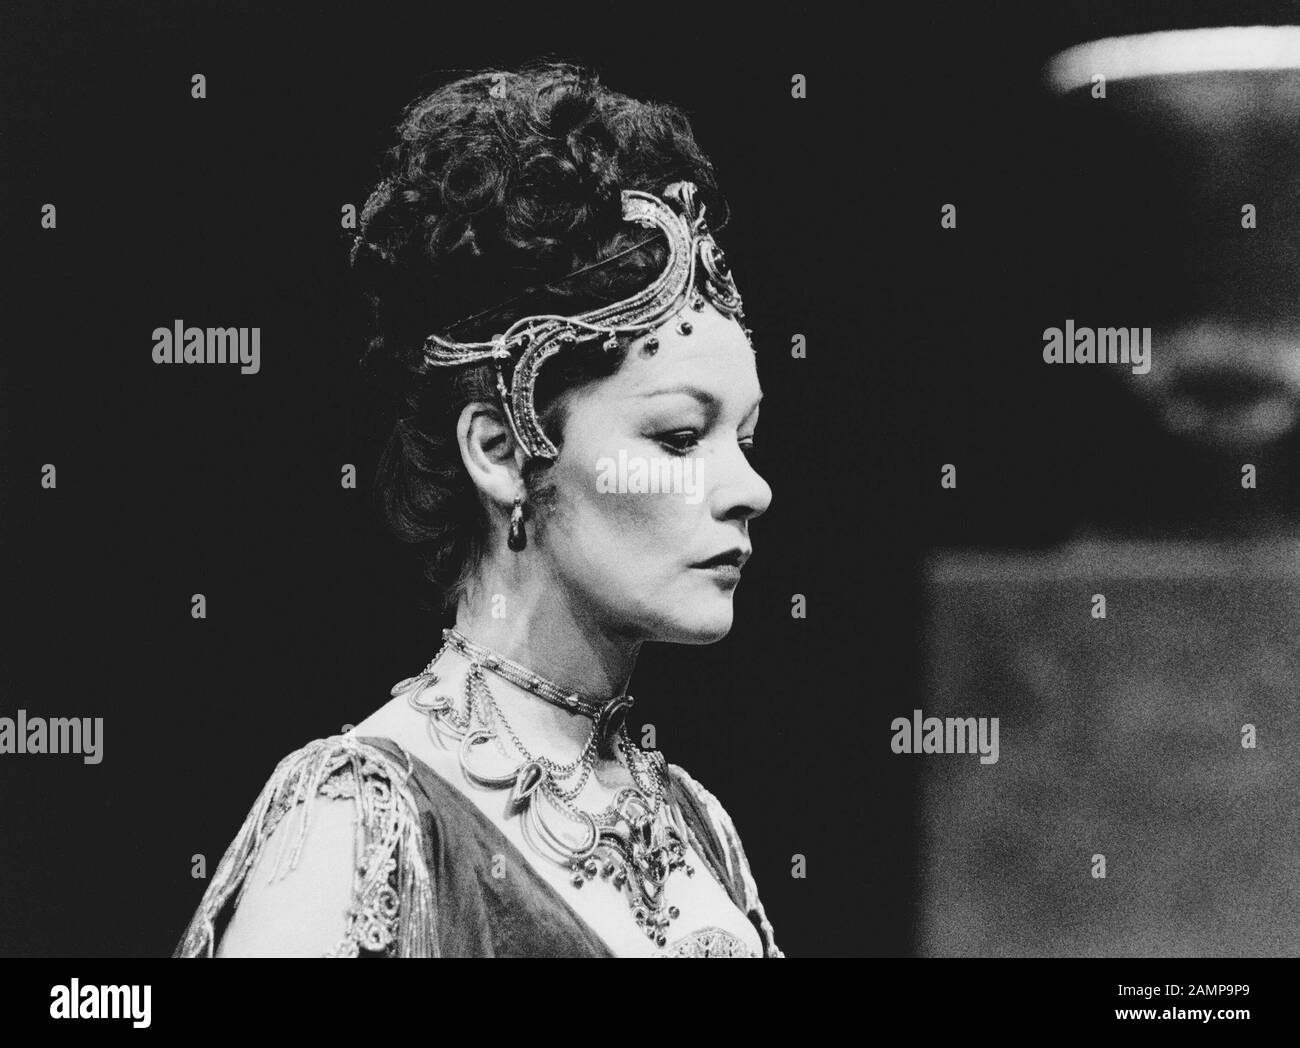 PHEDRA by Jean Racine English stage version by Robert David MacDonald directed & designed by Philip Prowse lighting: Gerry Jenkinson  Glenda Jackson (Phedra) The Old Vic, London SE1 21/11/1984 Stock Photo